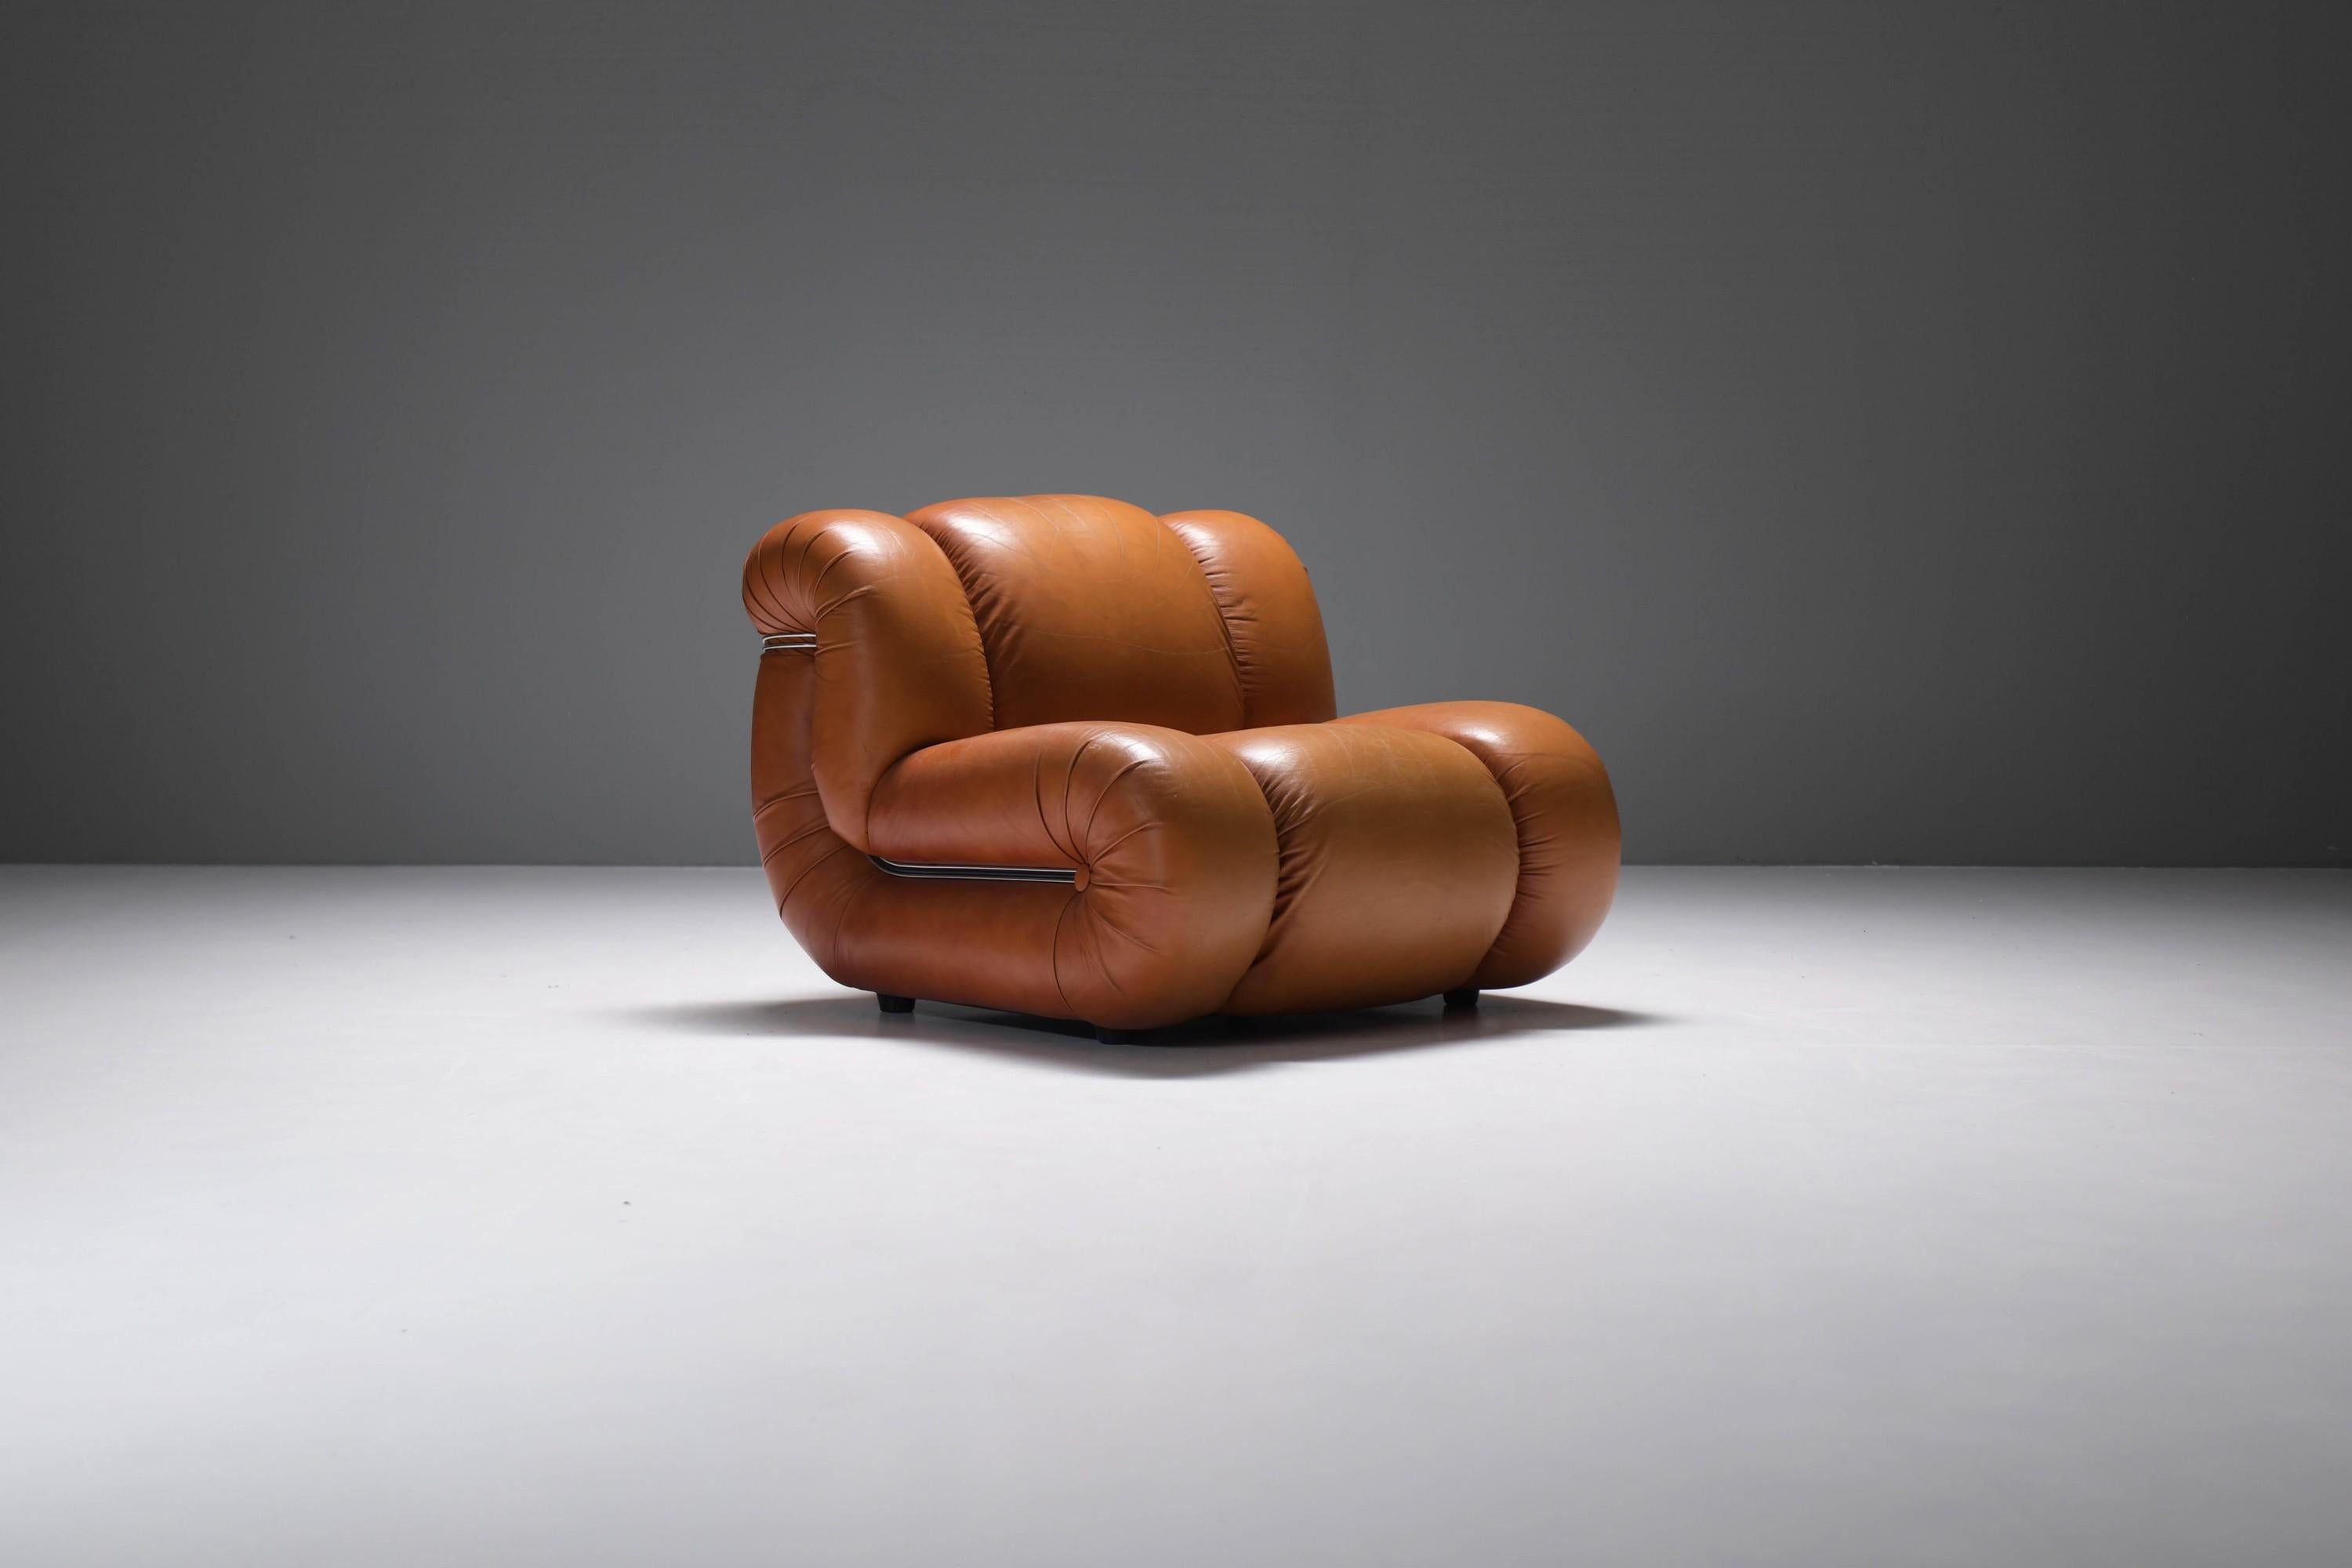 Very comfortable Velasquez lounge chair in its original cognac leather.  Stunning patina! 
Produced by Mimo Padova Italy in 1970s.

This unique design piece from Italy is very comfortable and is consist of sculptural, modular elements molded